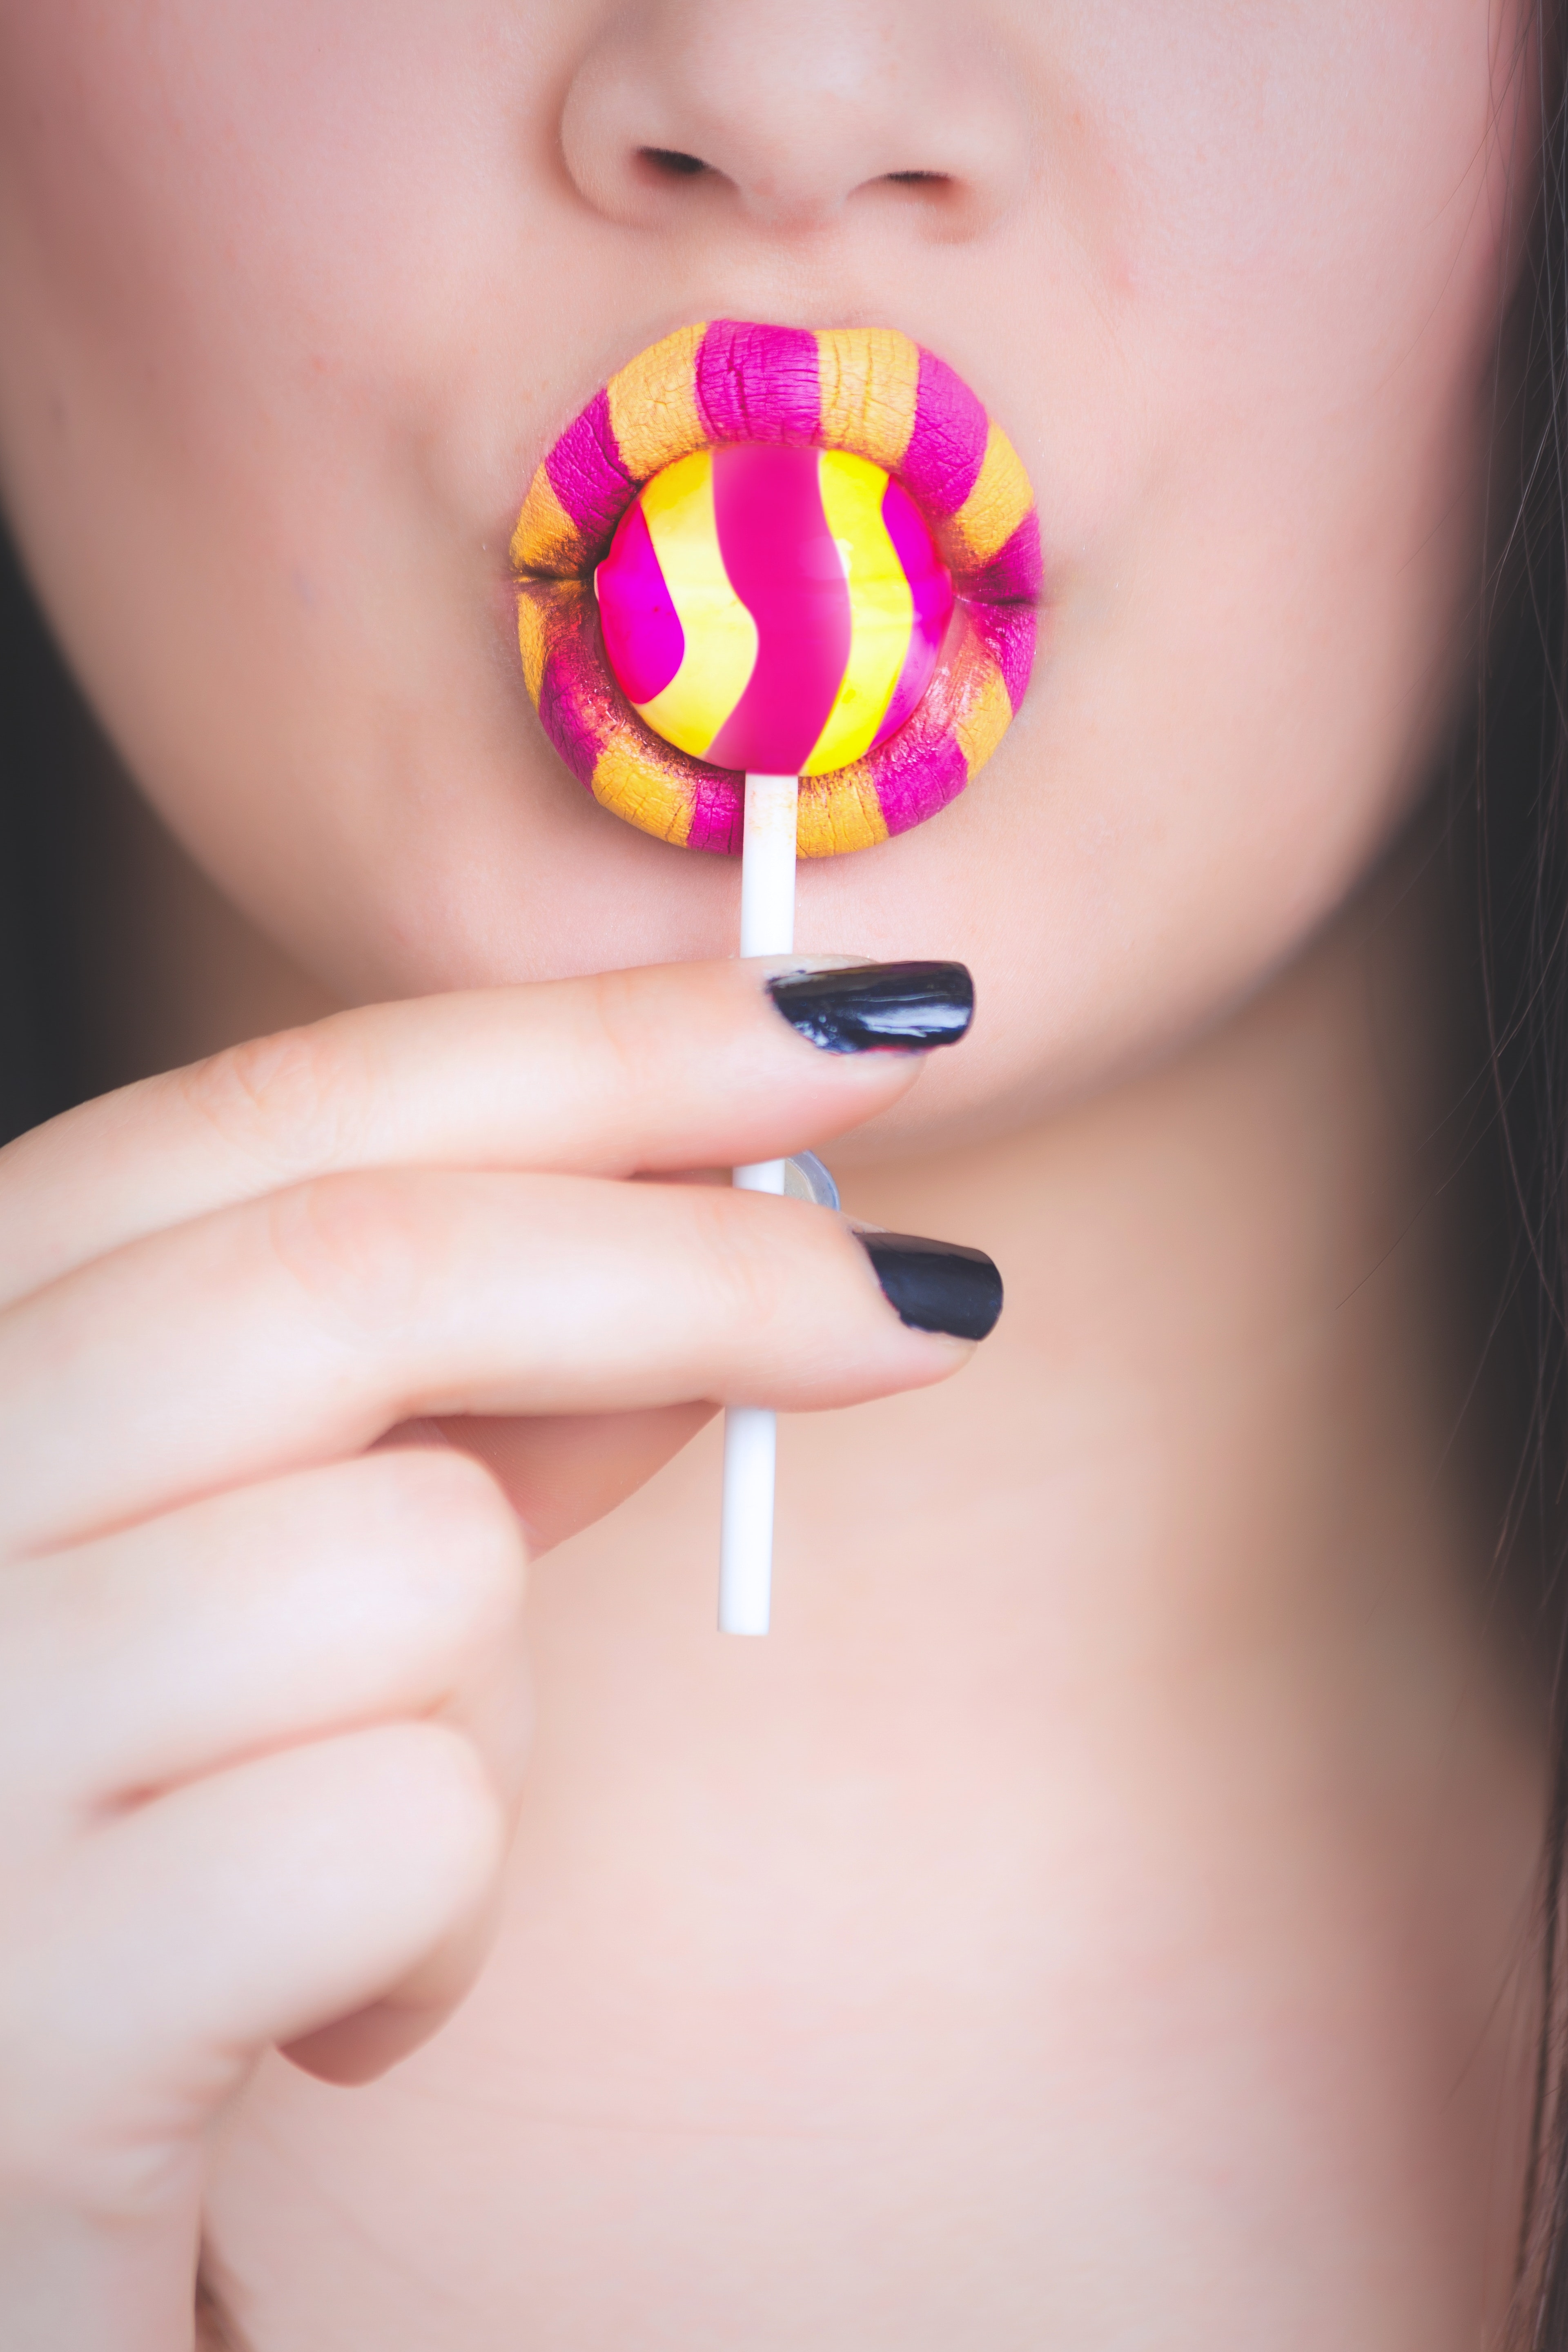 Woman holding yellow and pink candy photo